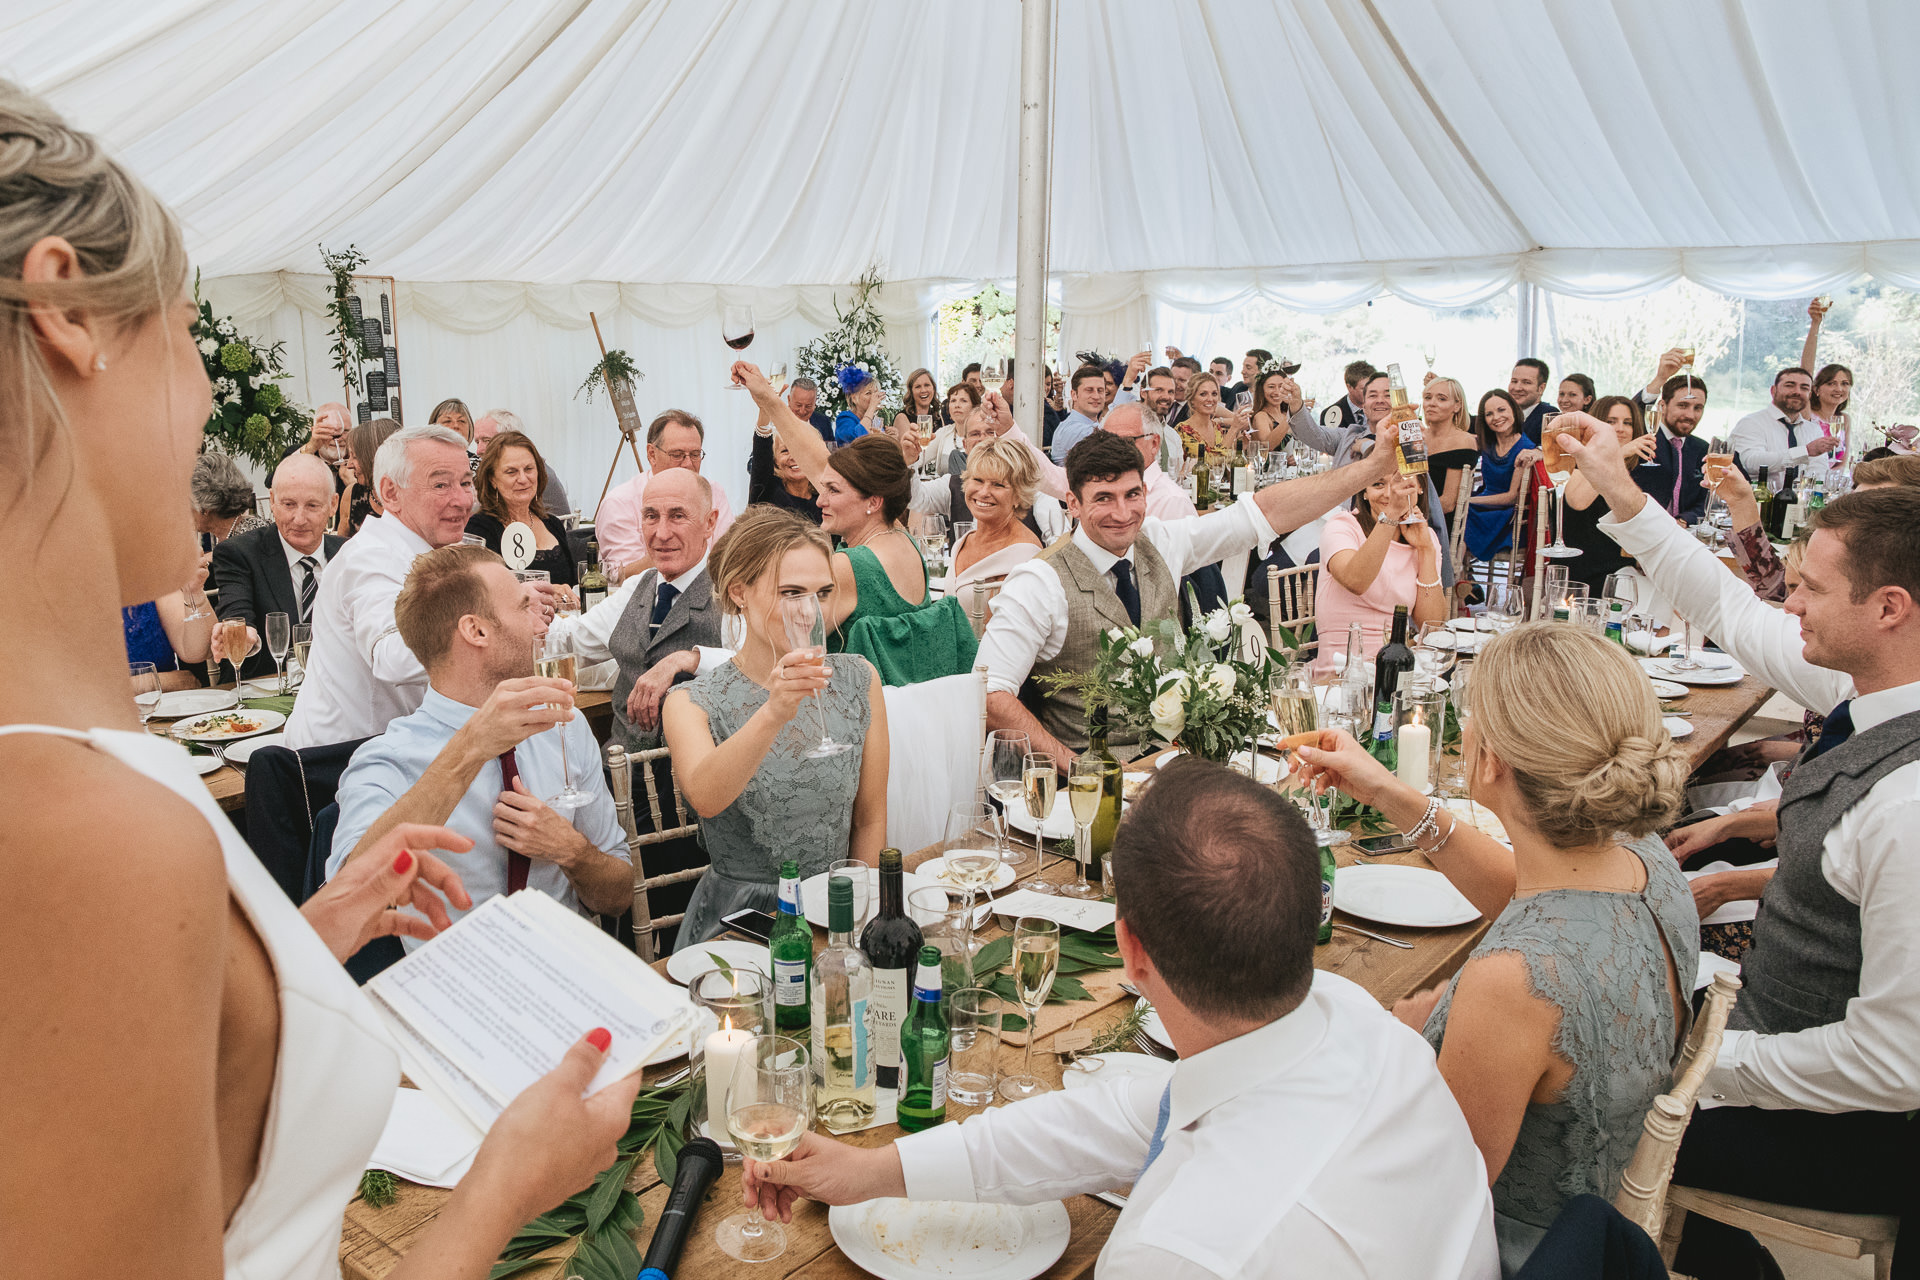 Guests raising toasts at wedding speeches inside a marquee